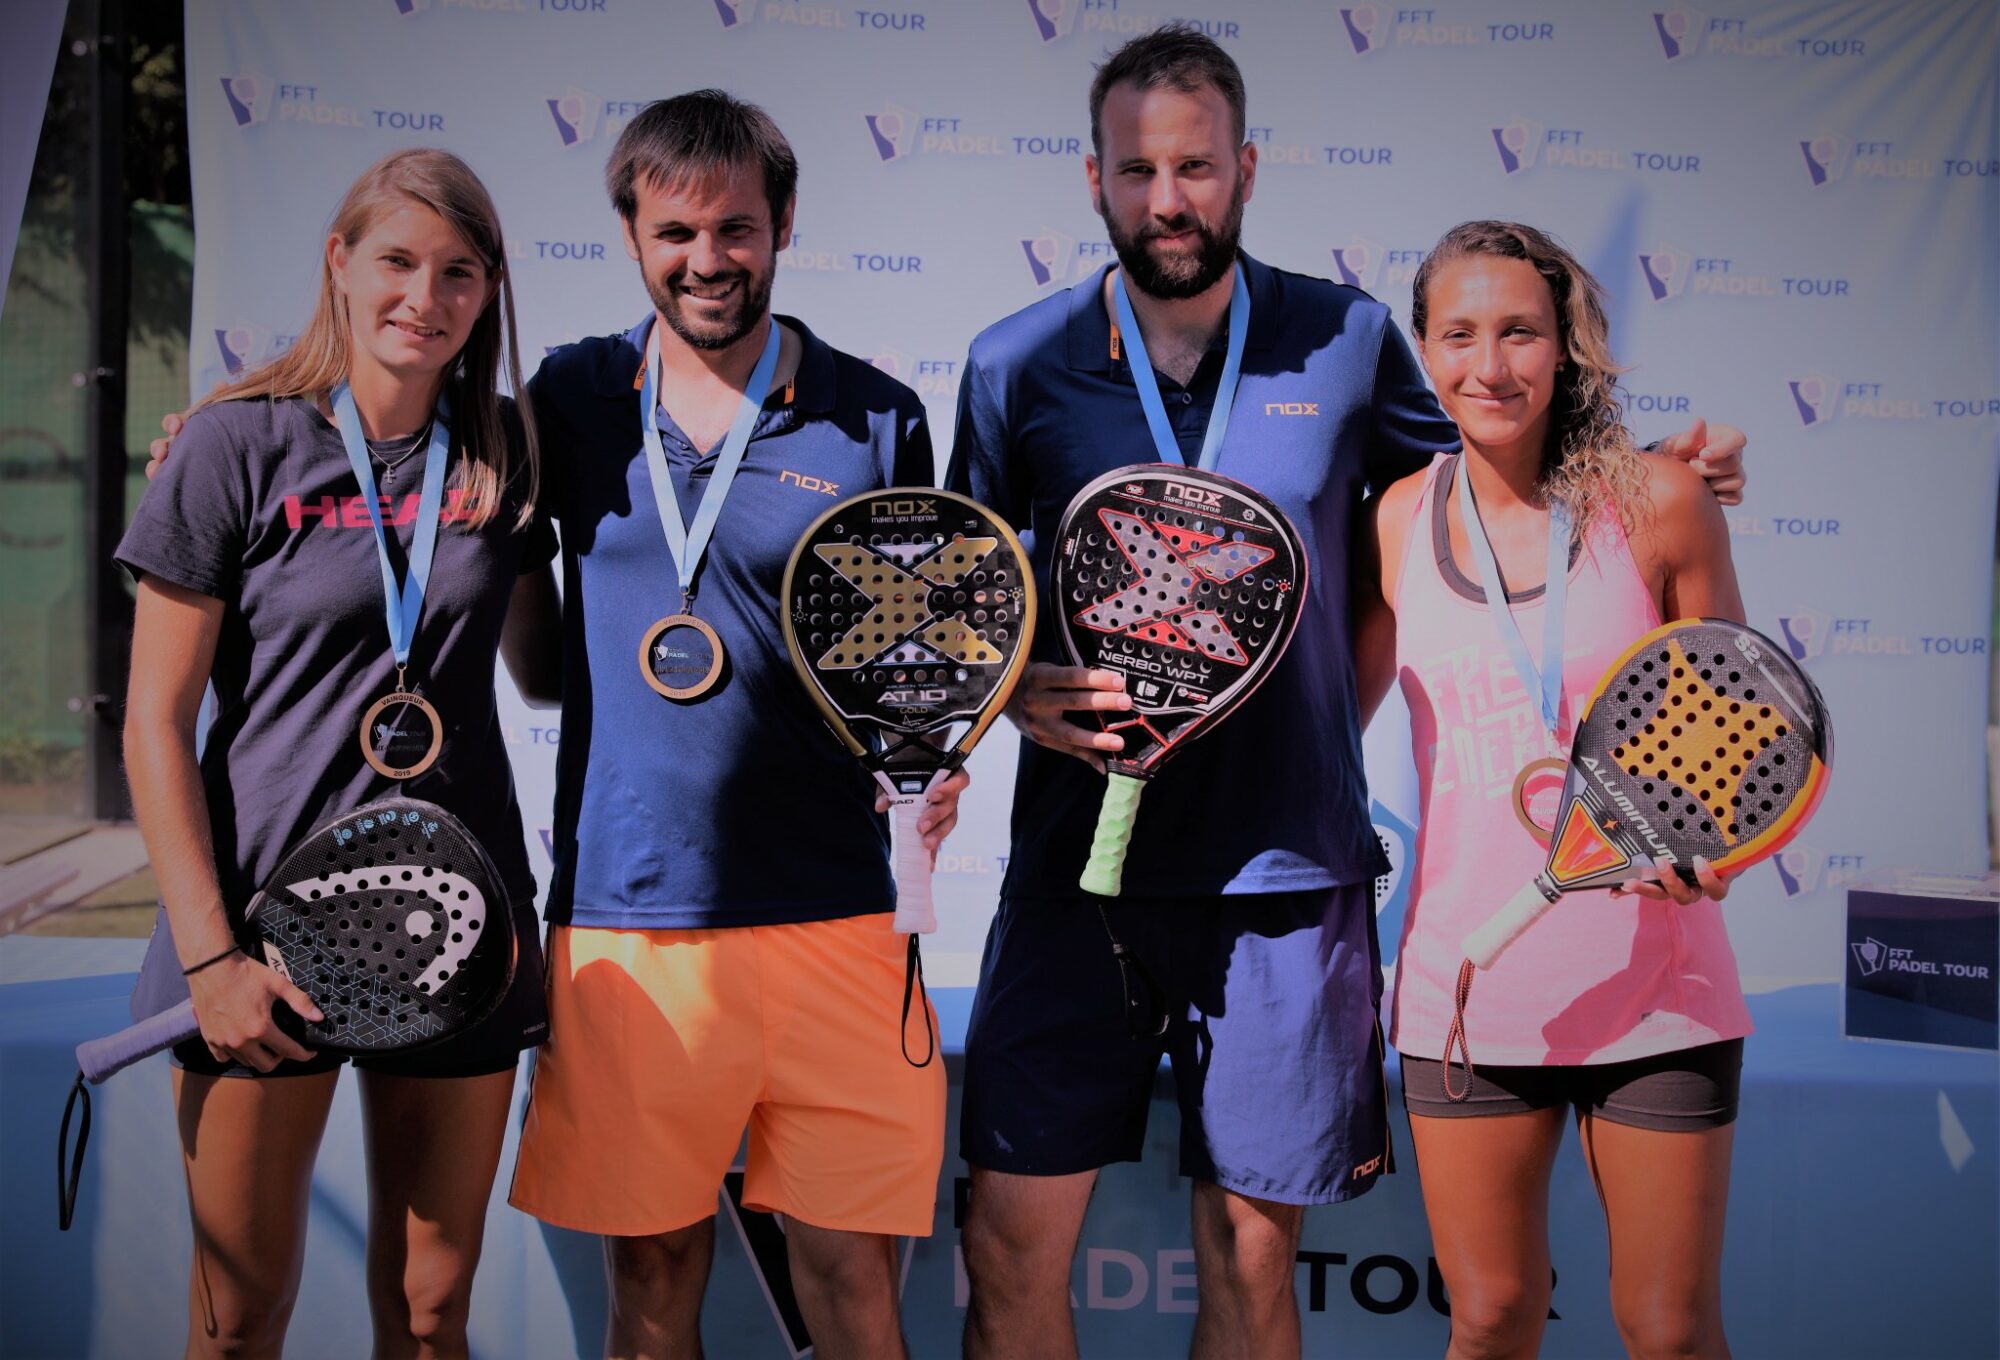 Collombon / Ginier - Maigret / Tison: In style at the FFT PADEL TOUR of Aix-en-Provence